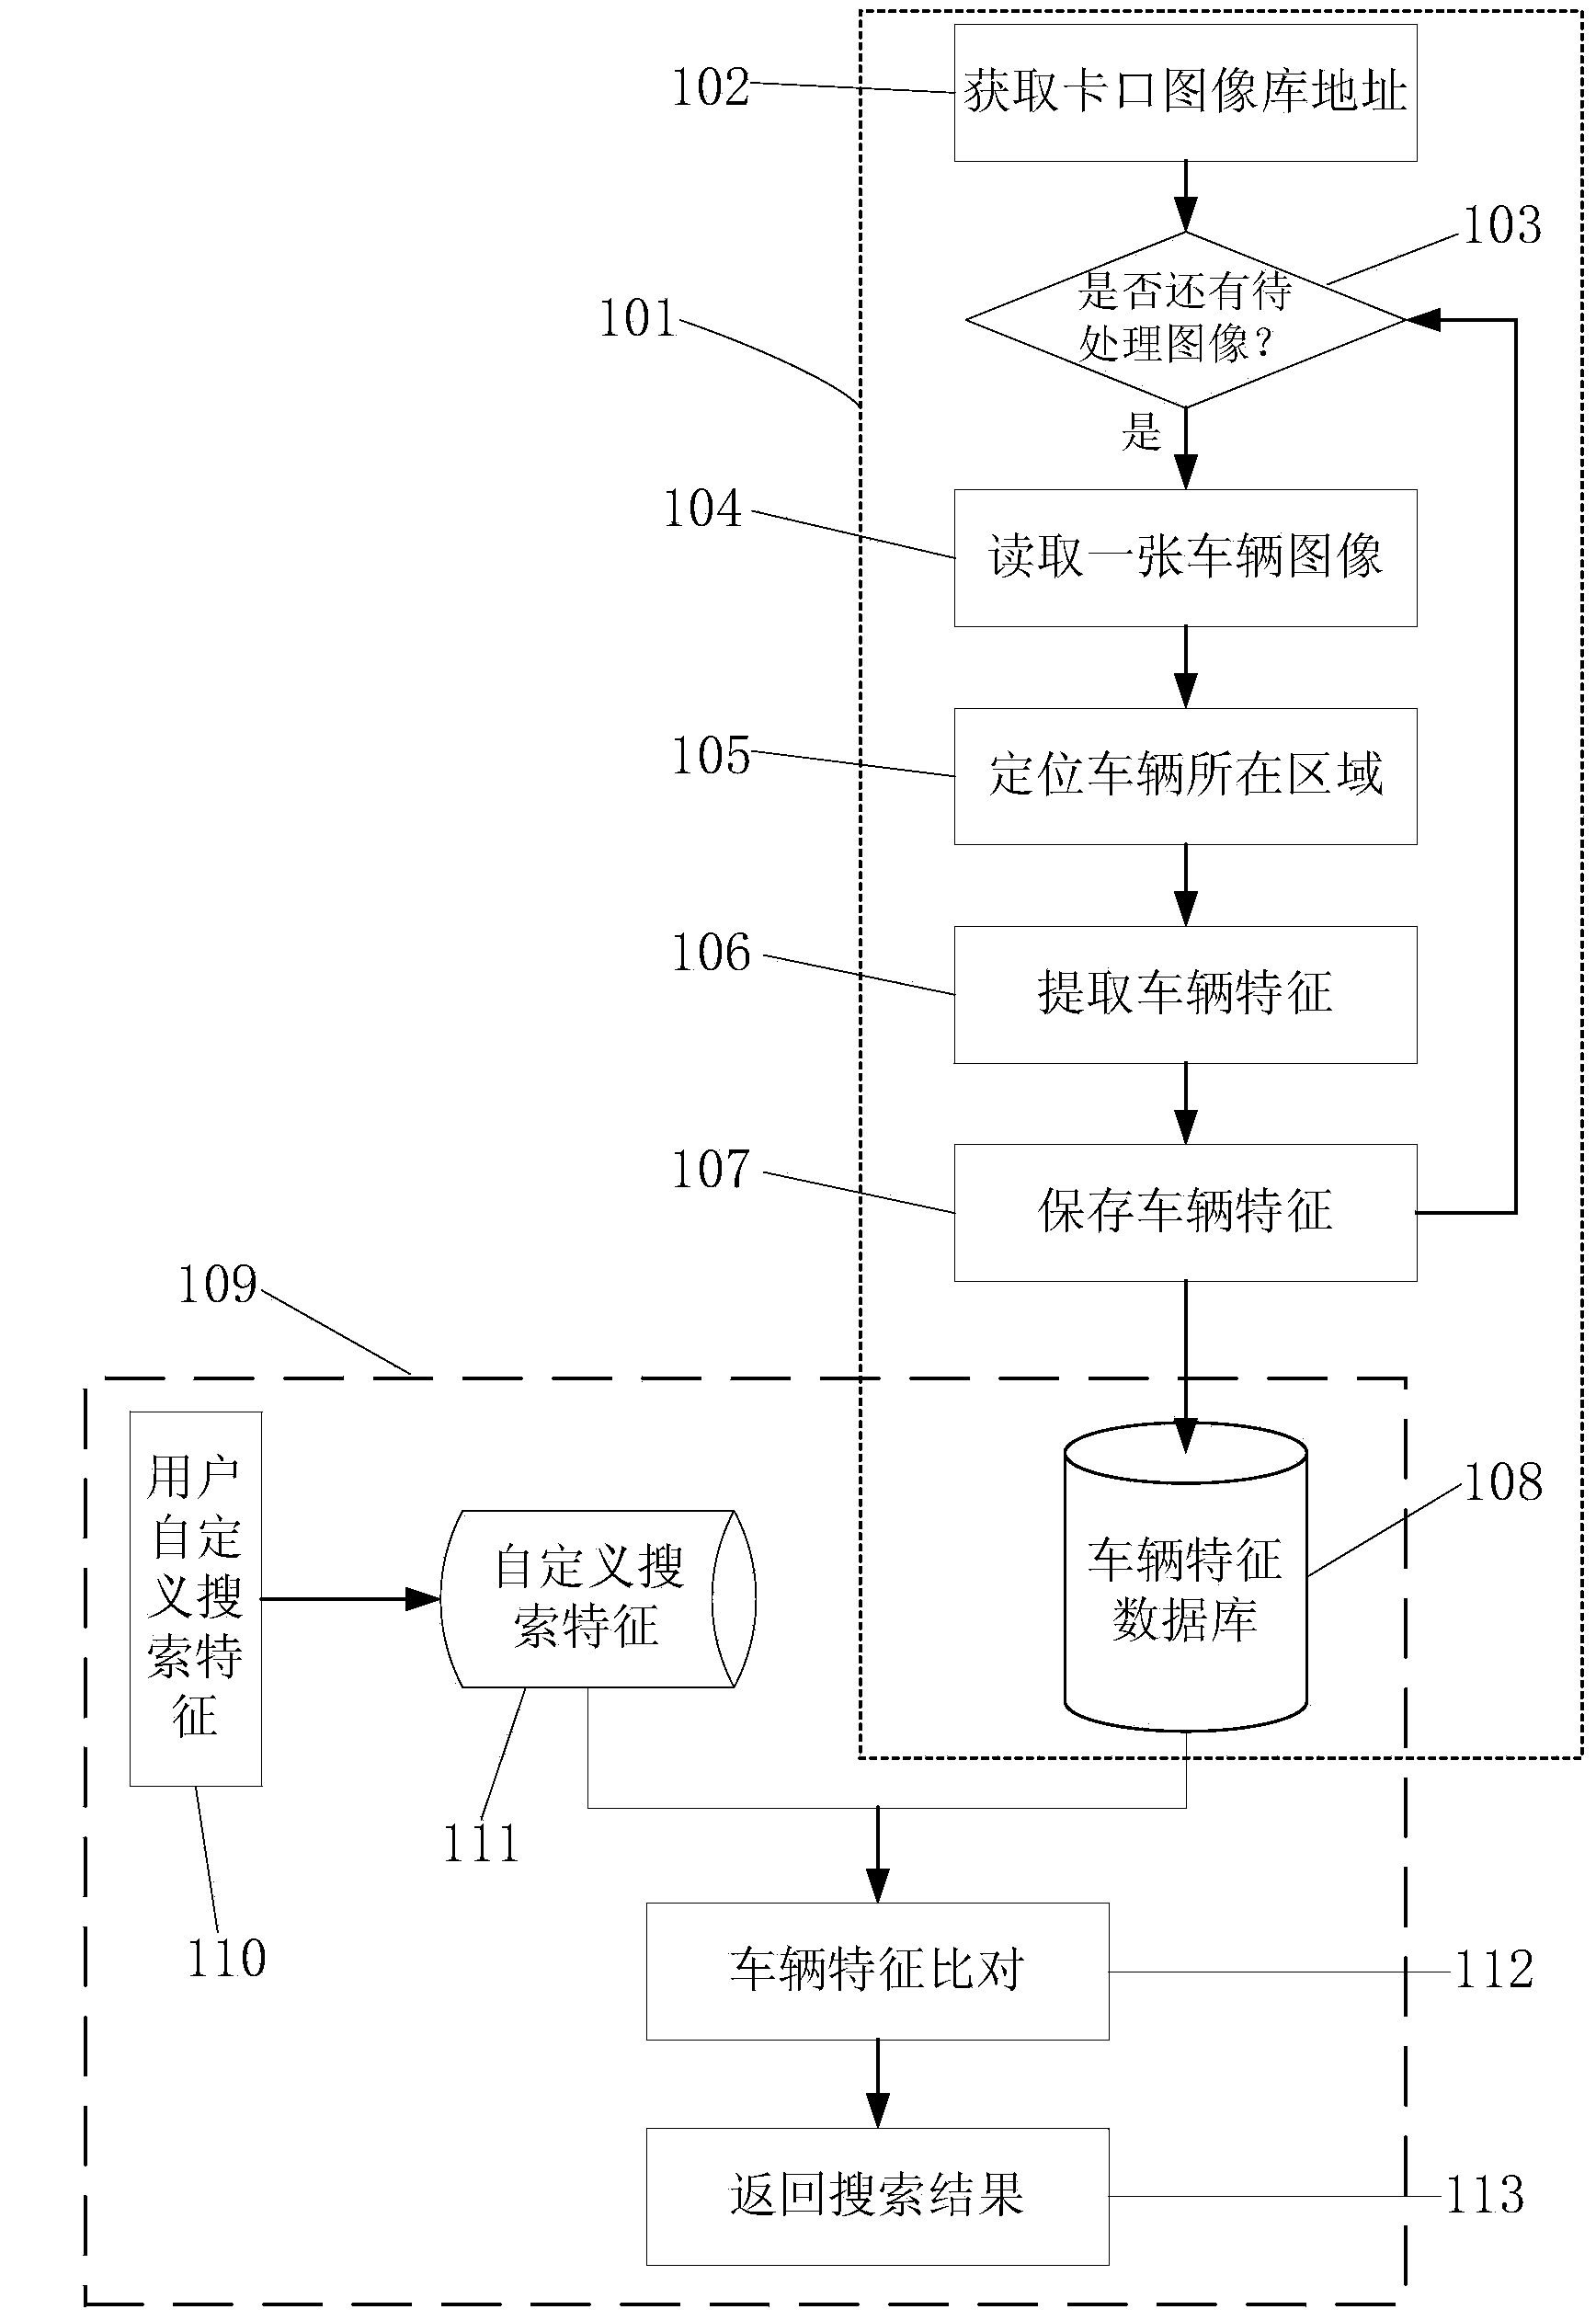 Vehicle searching method and system based on user-defined features